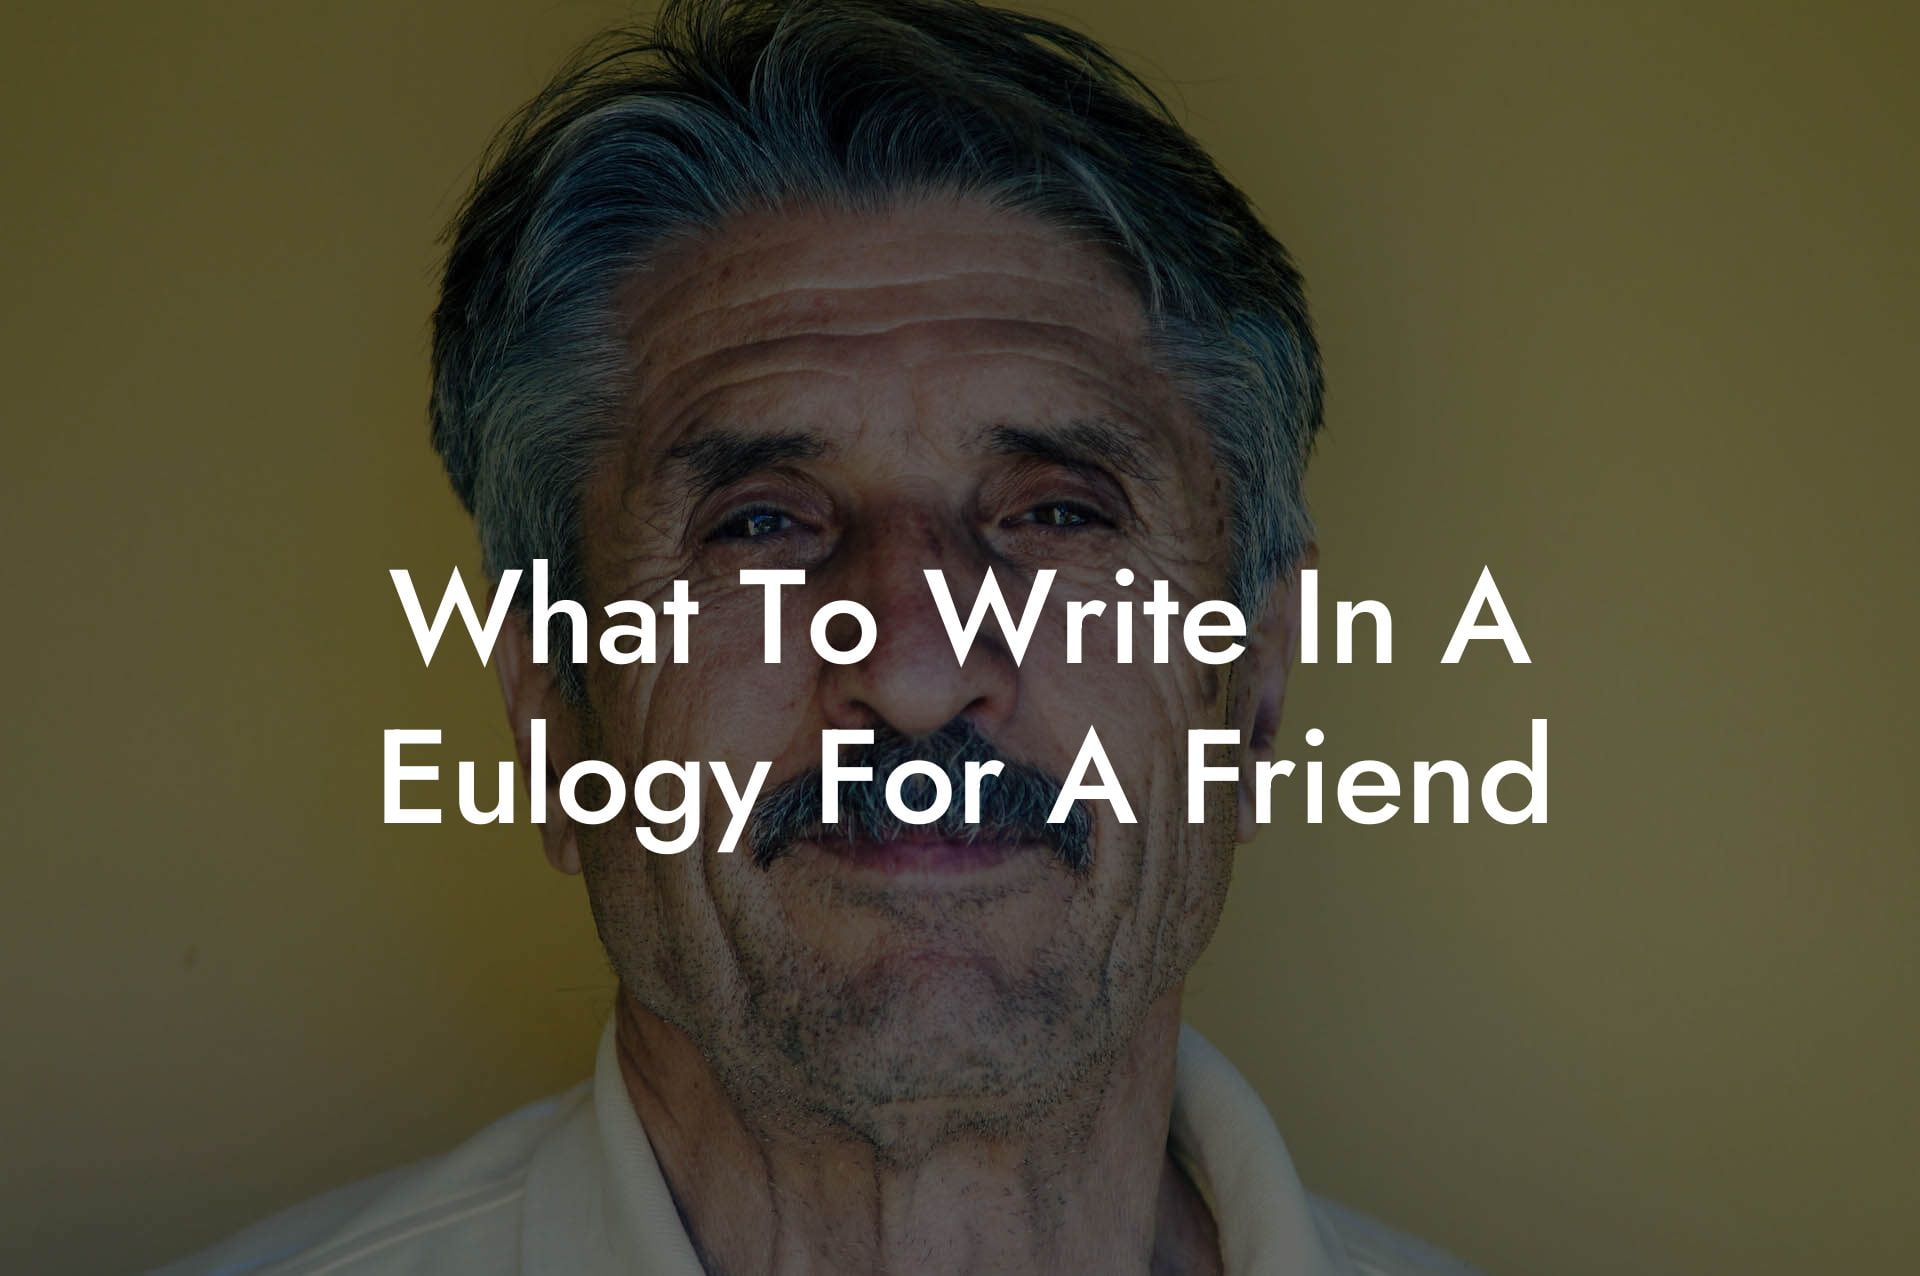 What To Write In A Eulogy For A Friend